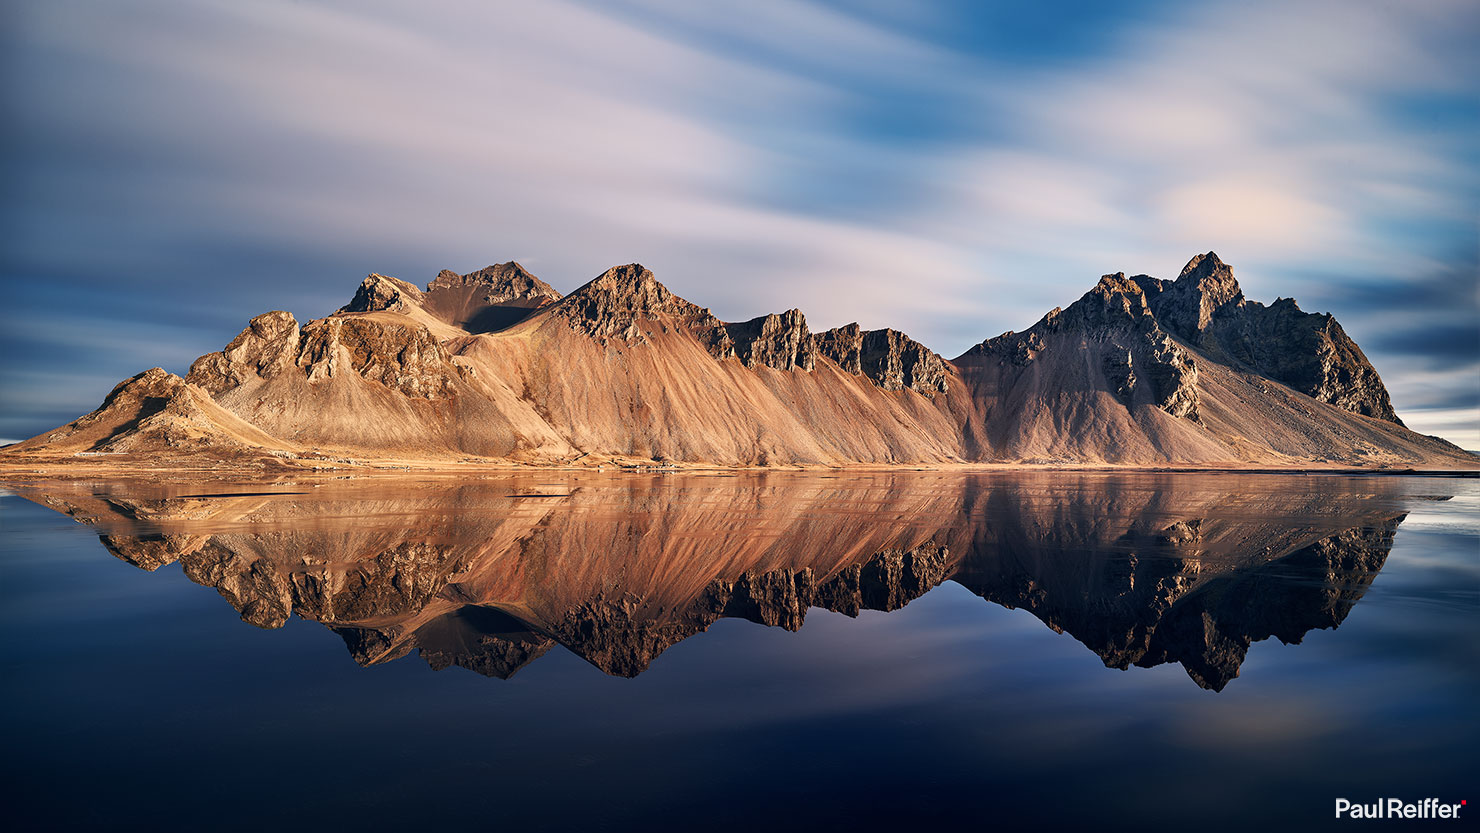 Masterclass On Reflection 16 9 Long Exposure Landscapes Paul Reiffer Photography Learn How